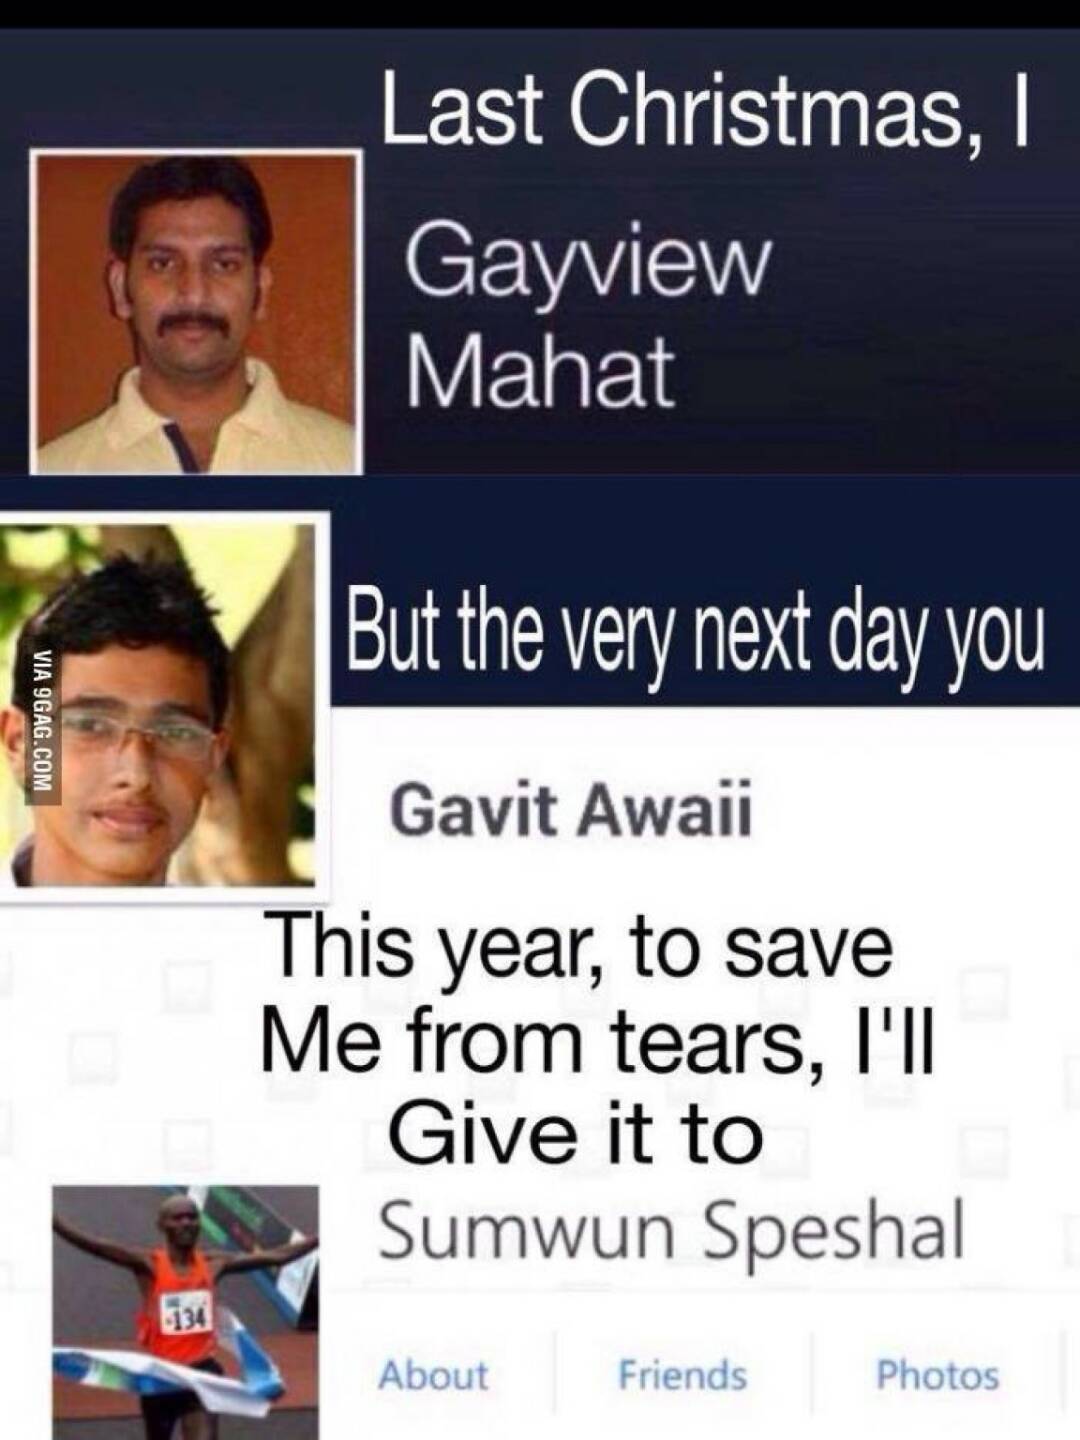 Last Christmas I Gayview Mahat,  But the very next day, you Gavit Awaii, This year to save me from tears, I’ll give it to Sumwun Speshal